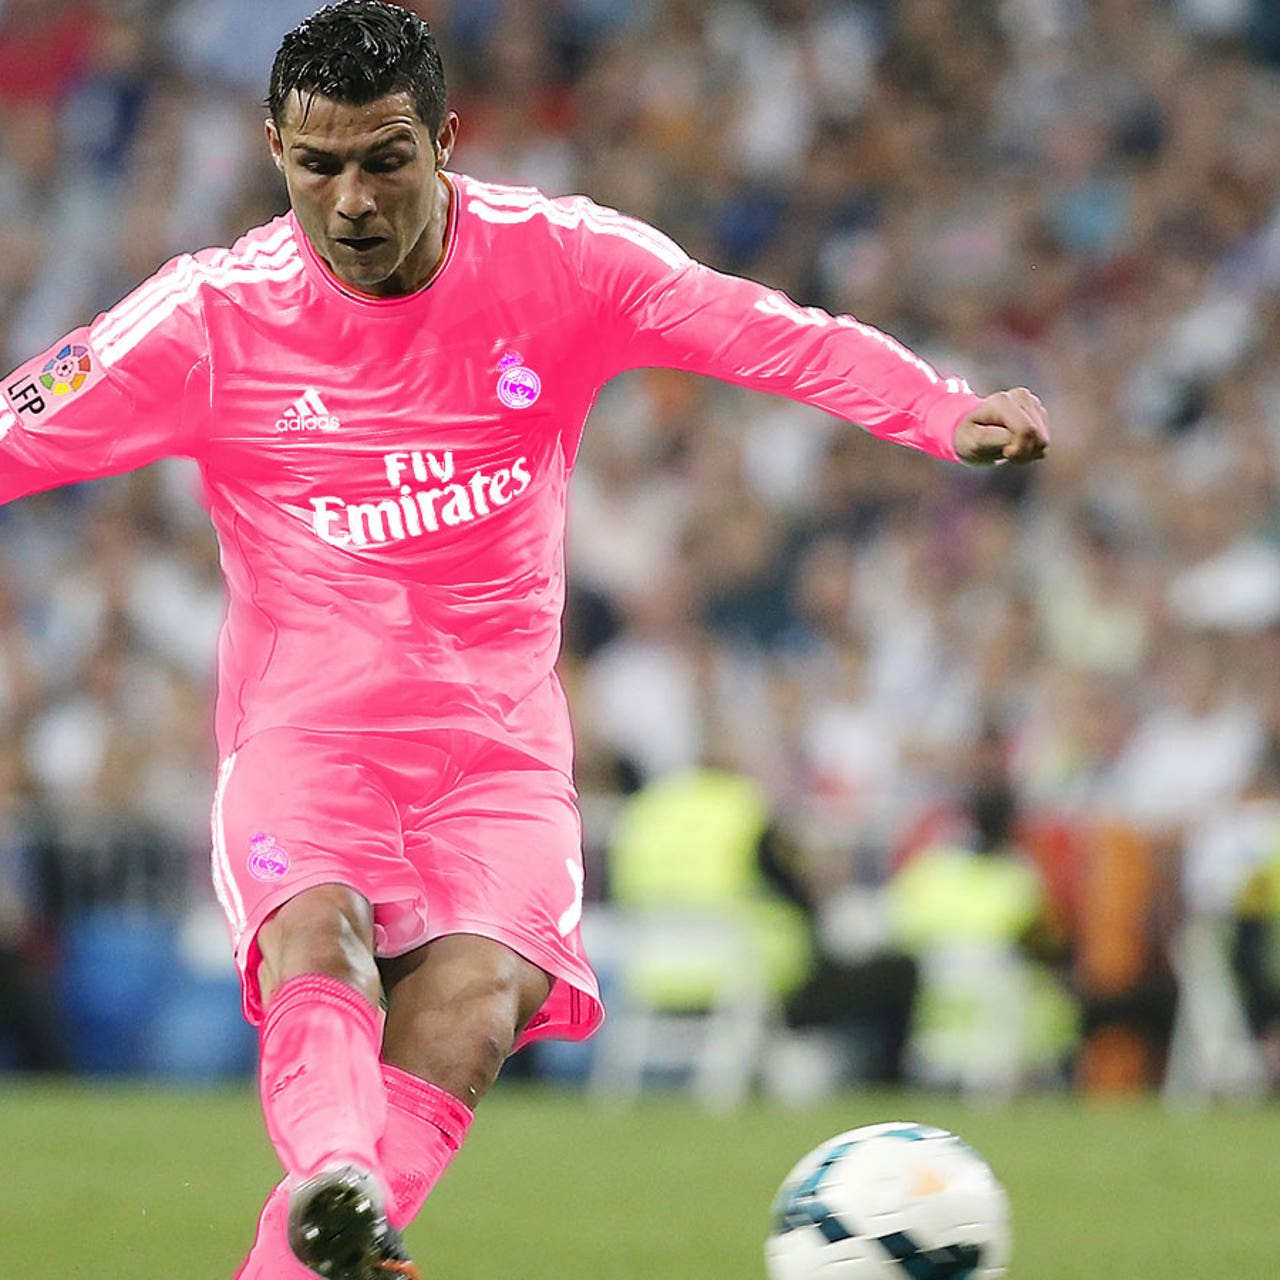 Real Men Wear Pink! Check out Real Madrid's new away kits